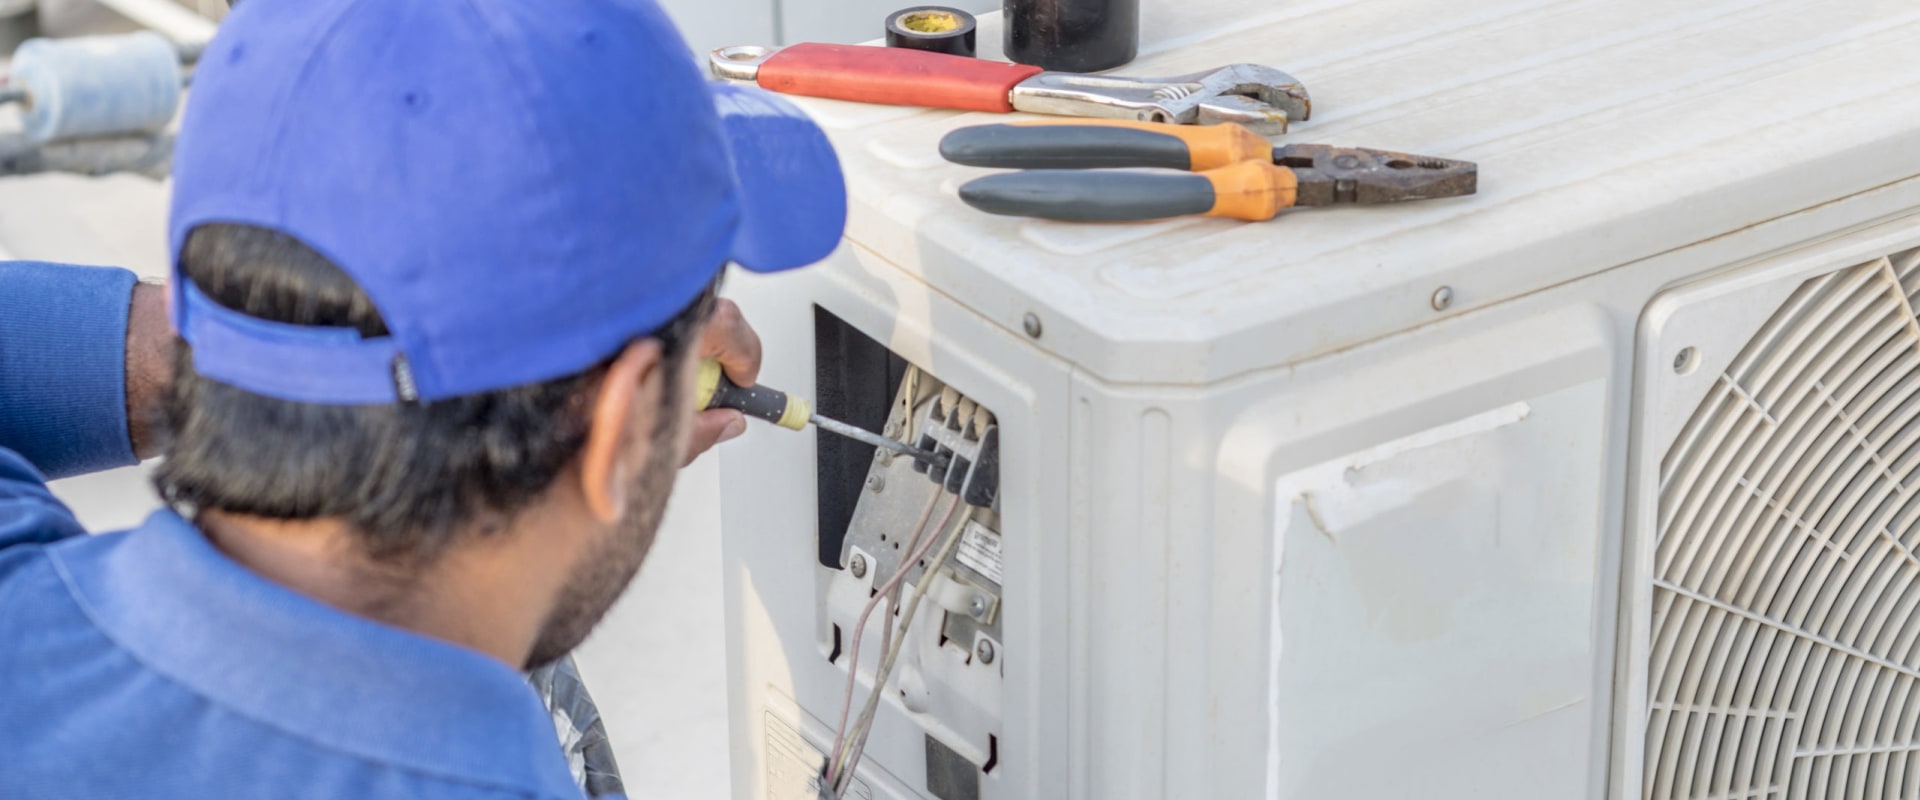 The Benefits of Regular HVAC Tune-Ups: Get the Most Out of Your AC System